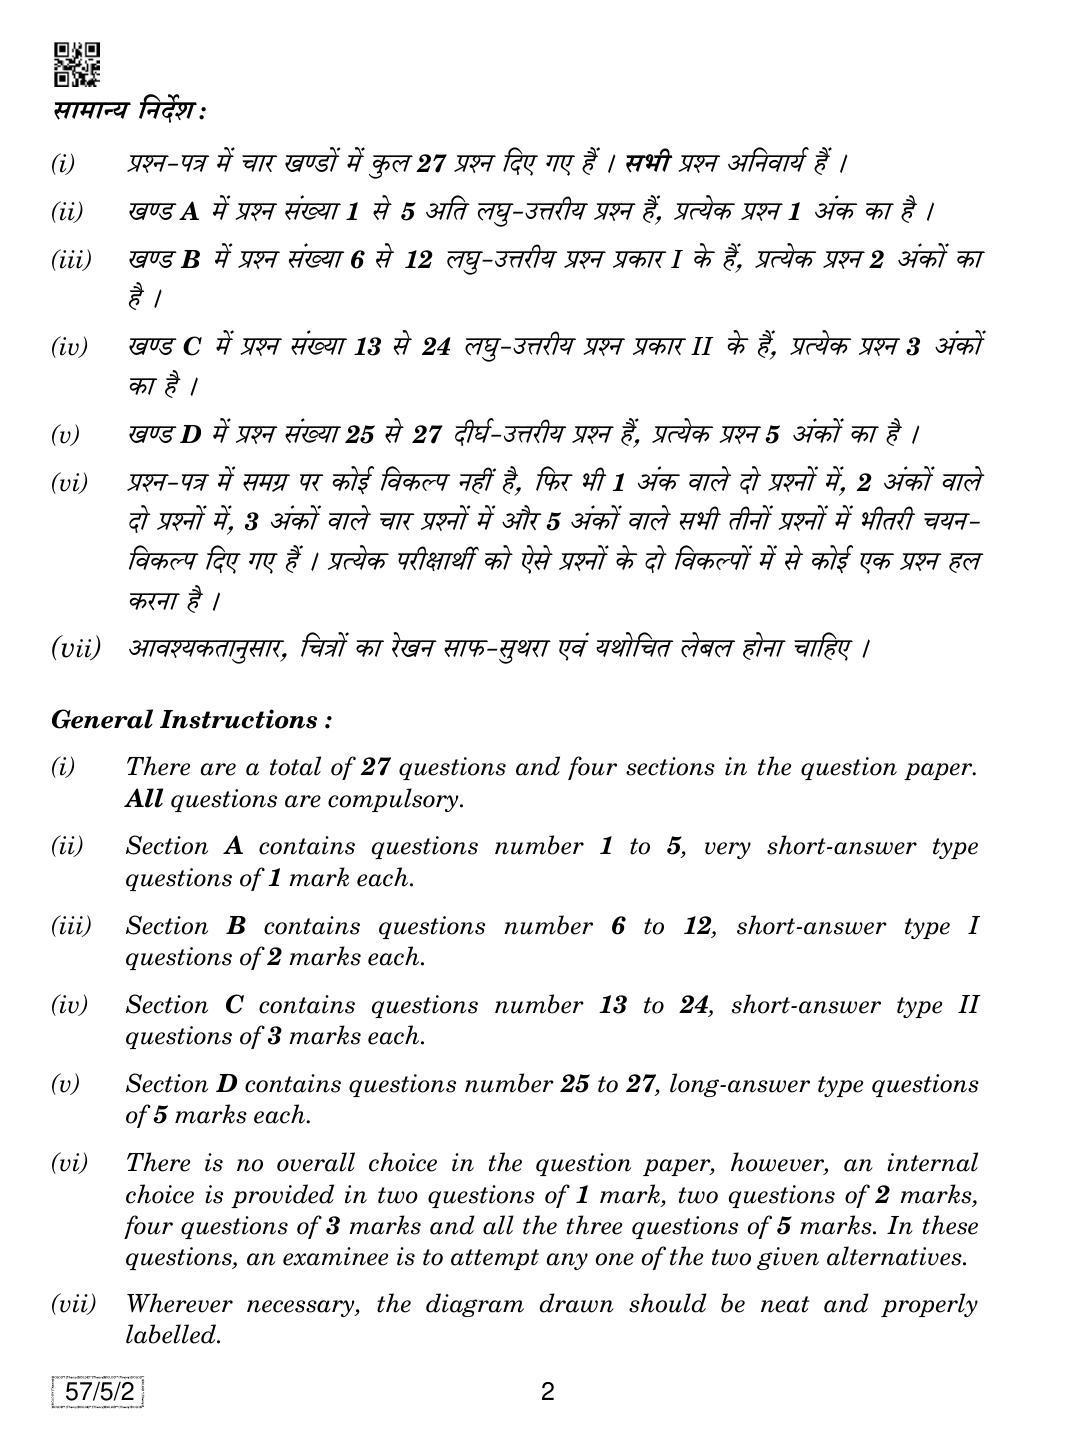 CBSE Class 12 57-5-2 Biology 2019 Question Paper - Page 2